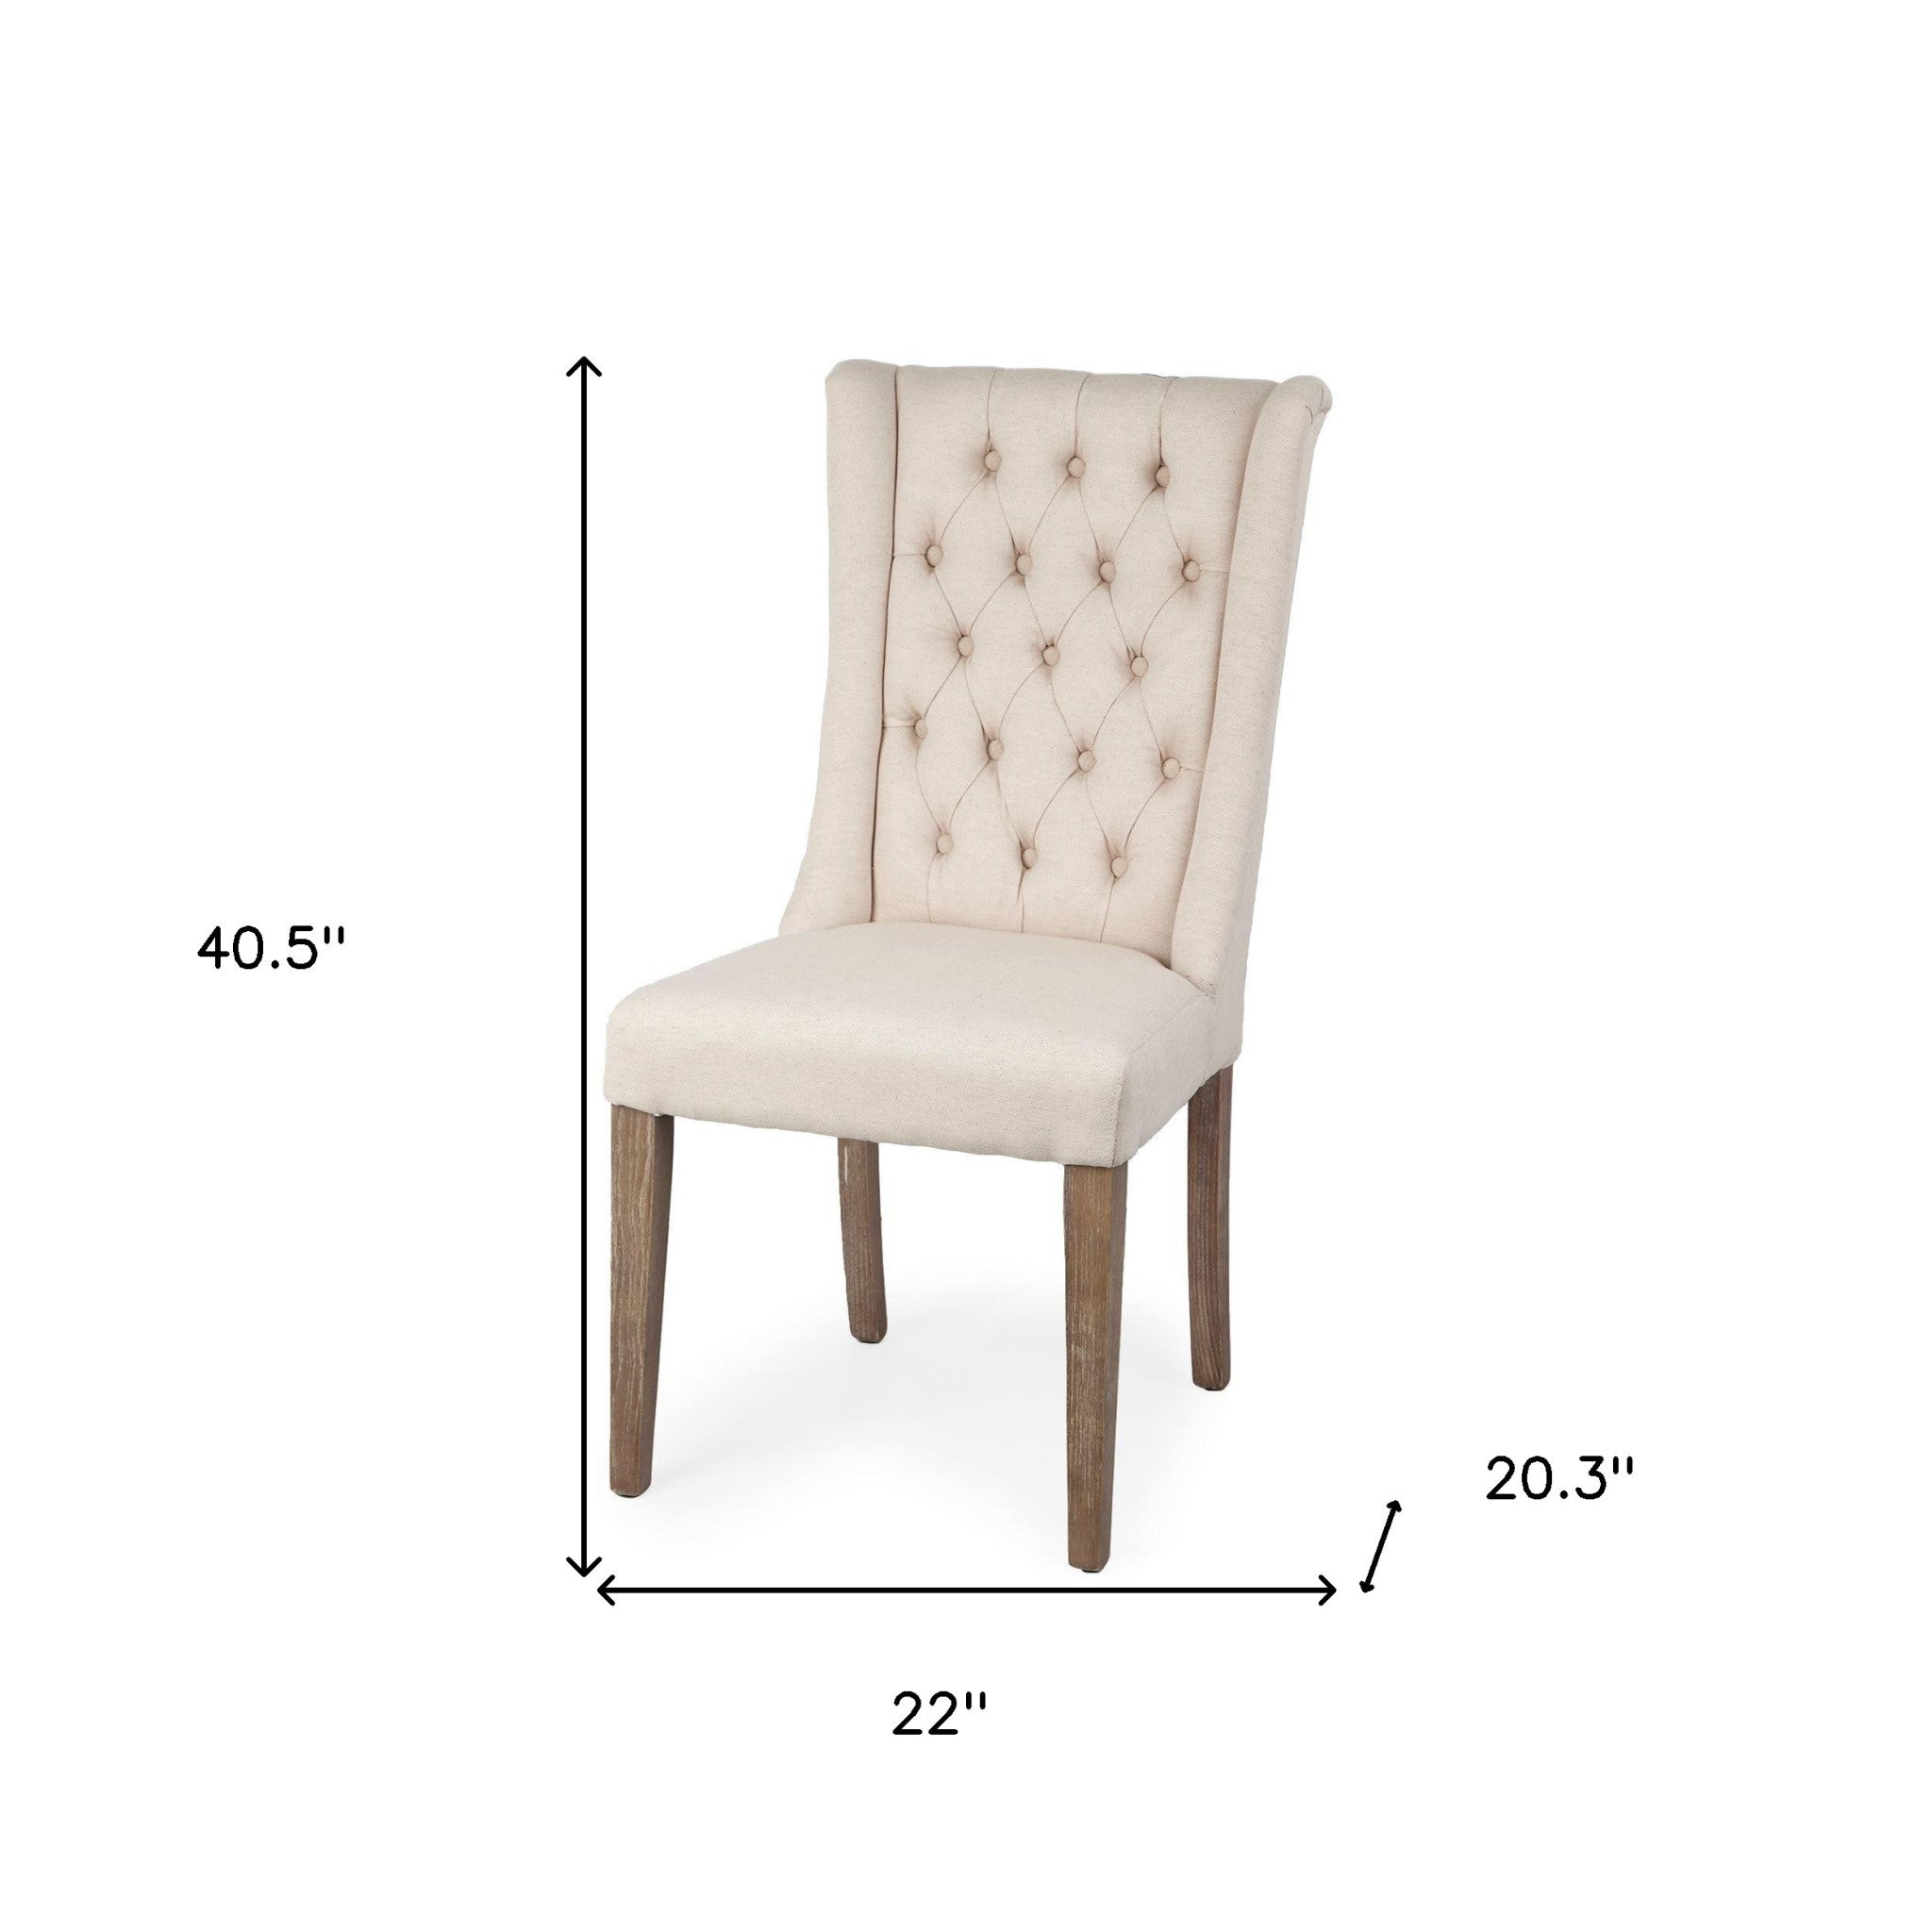 Cream Plush Linen Covering With Ash Solid Wood Base Dining Chair